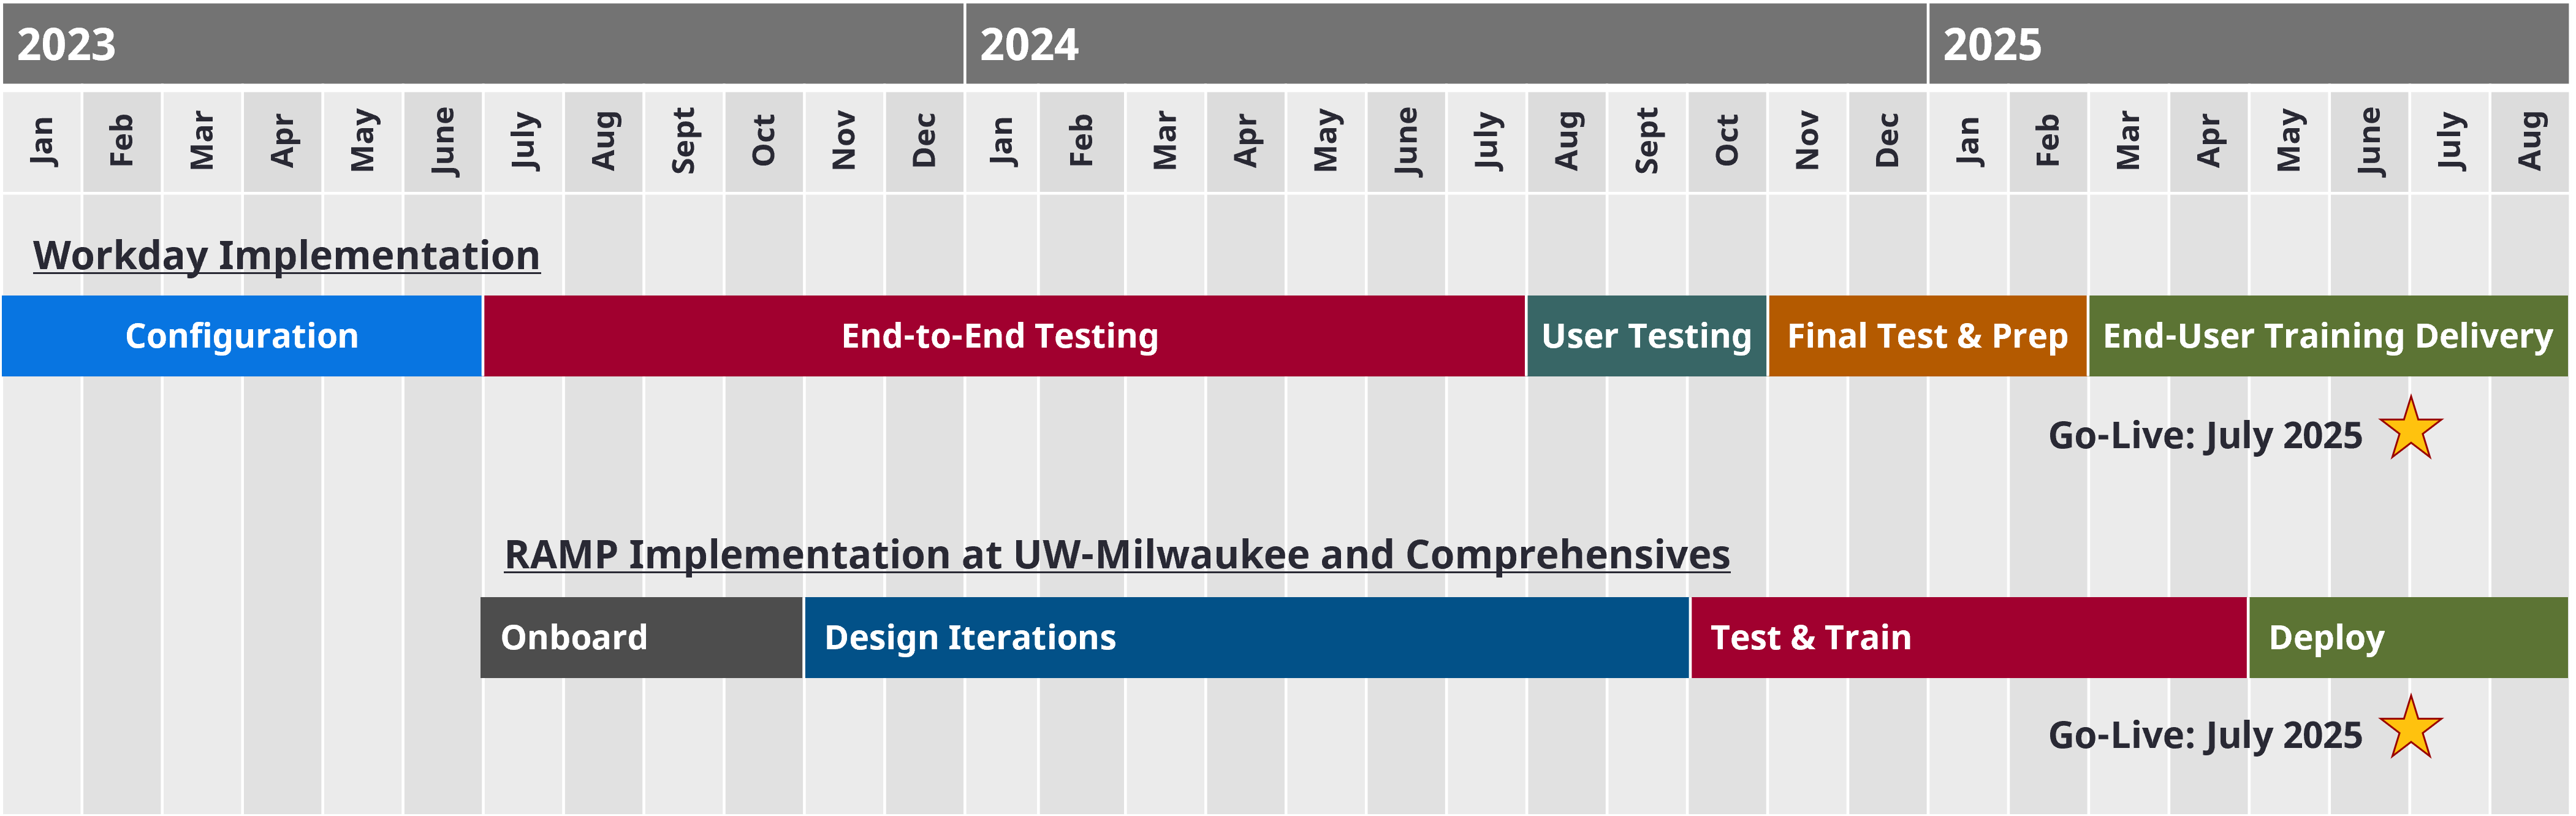 A visual timeline showing the Systemwide implementation of Workday, as well as the implementation timeline for the Research Administration Modernization Platform (RAMP) at UW-Milwaukee and the comprehensive institutions.